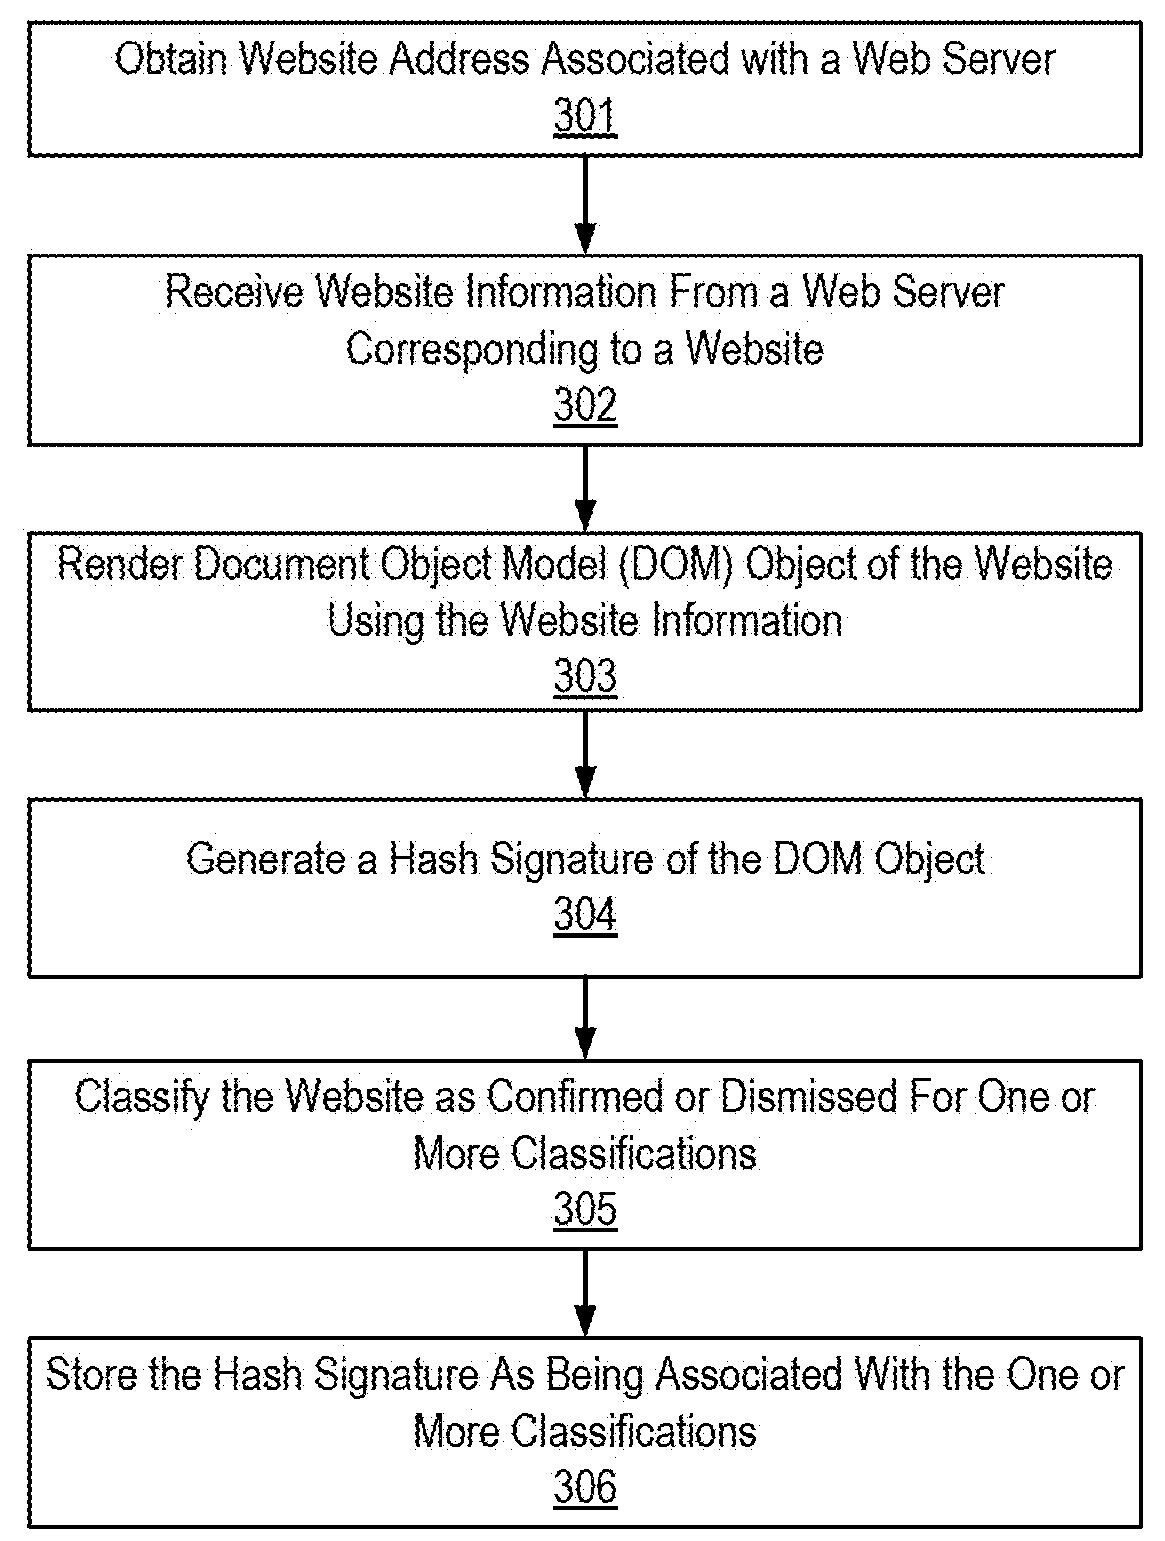 Using hash signatures of DOM objects to identify website similarity